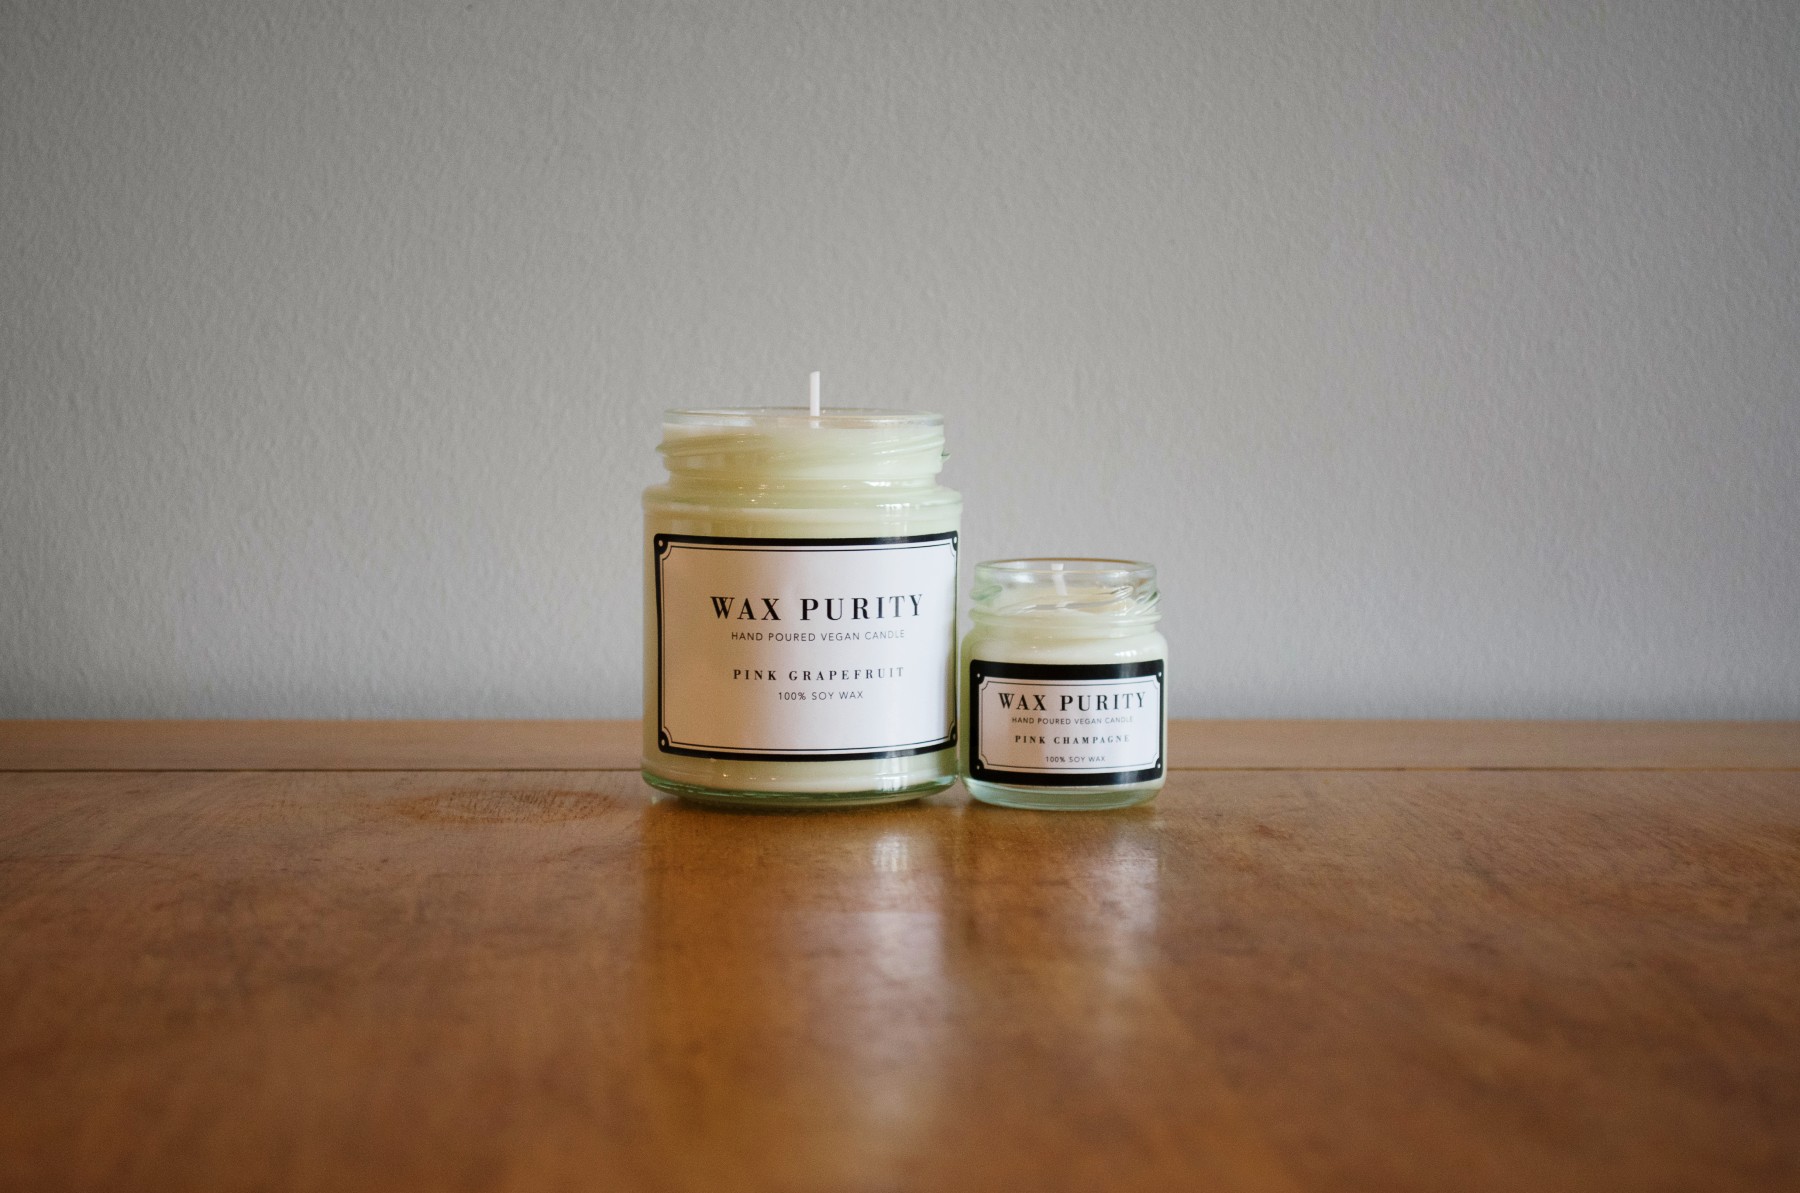 A pair of wax purity candles